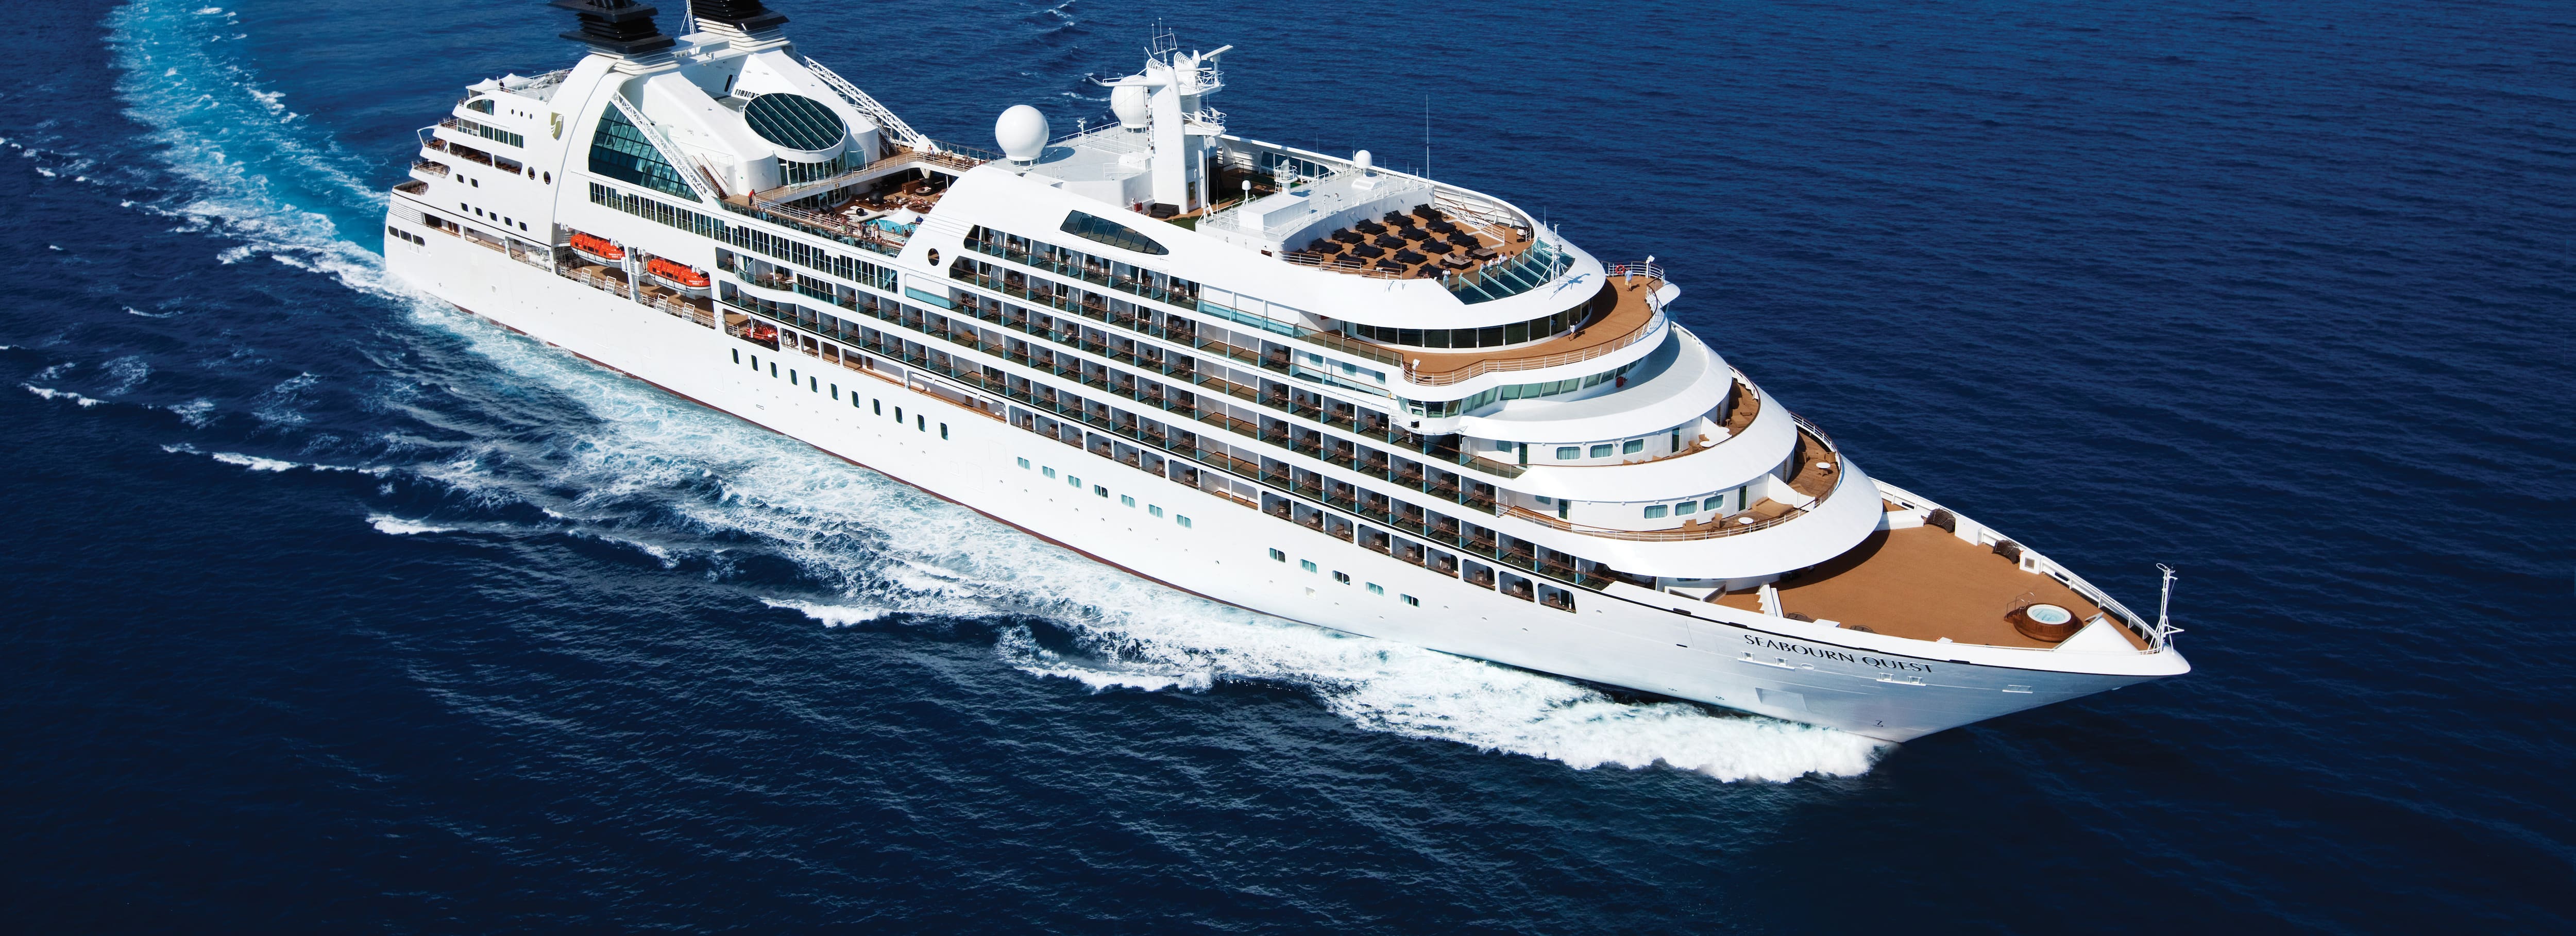 Seabourn Quest Ultra Luxury Cruise Ship Seabourn